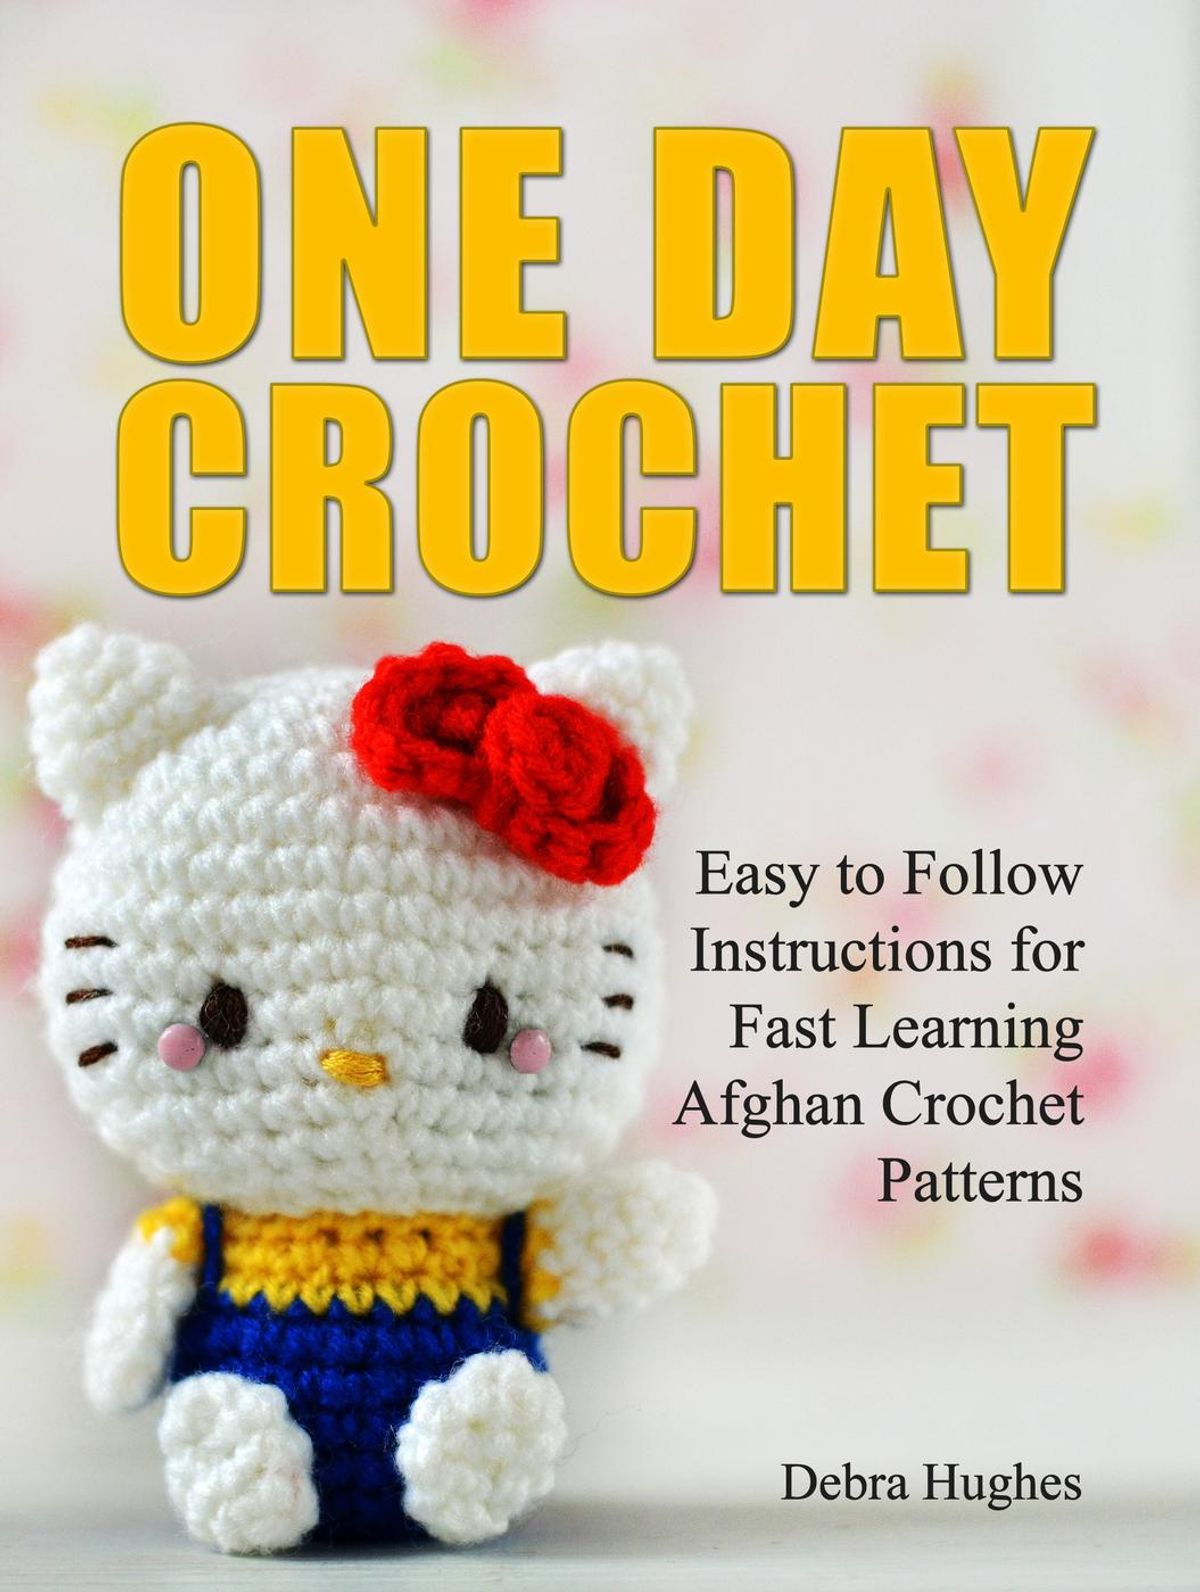 How To Follow A Crochet Pattern One Day Crochet Easy To Follow Instructions For Fast Learning